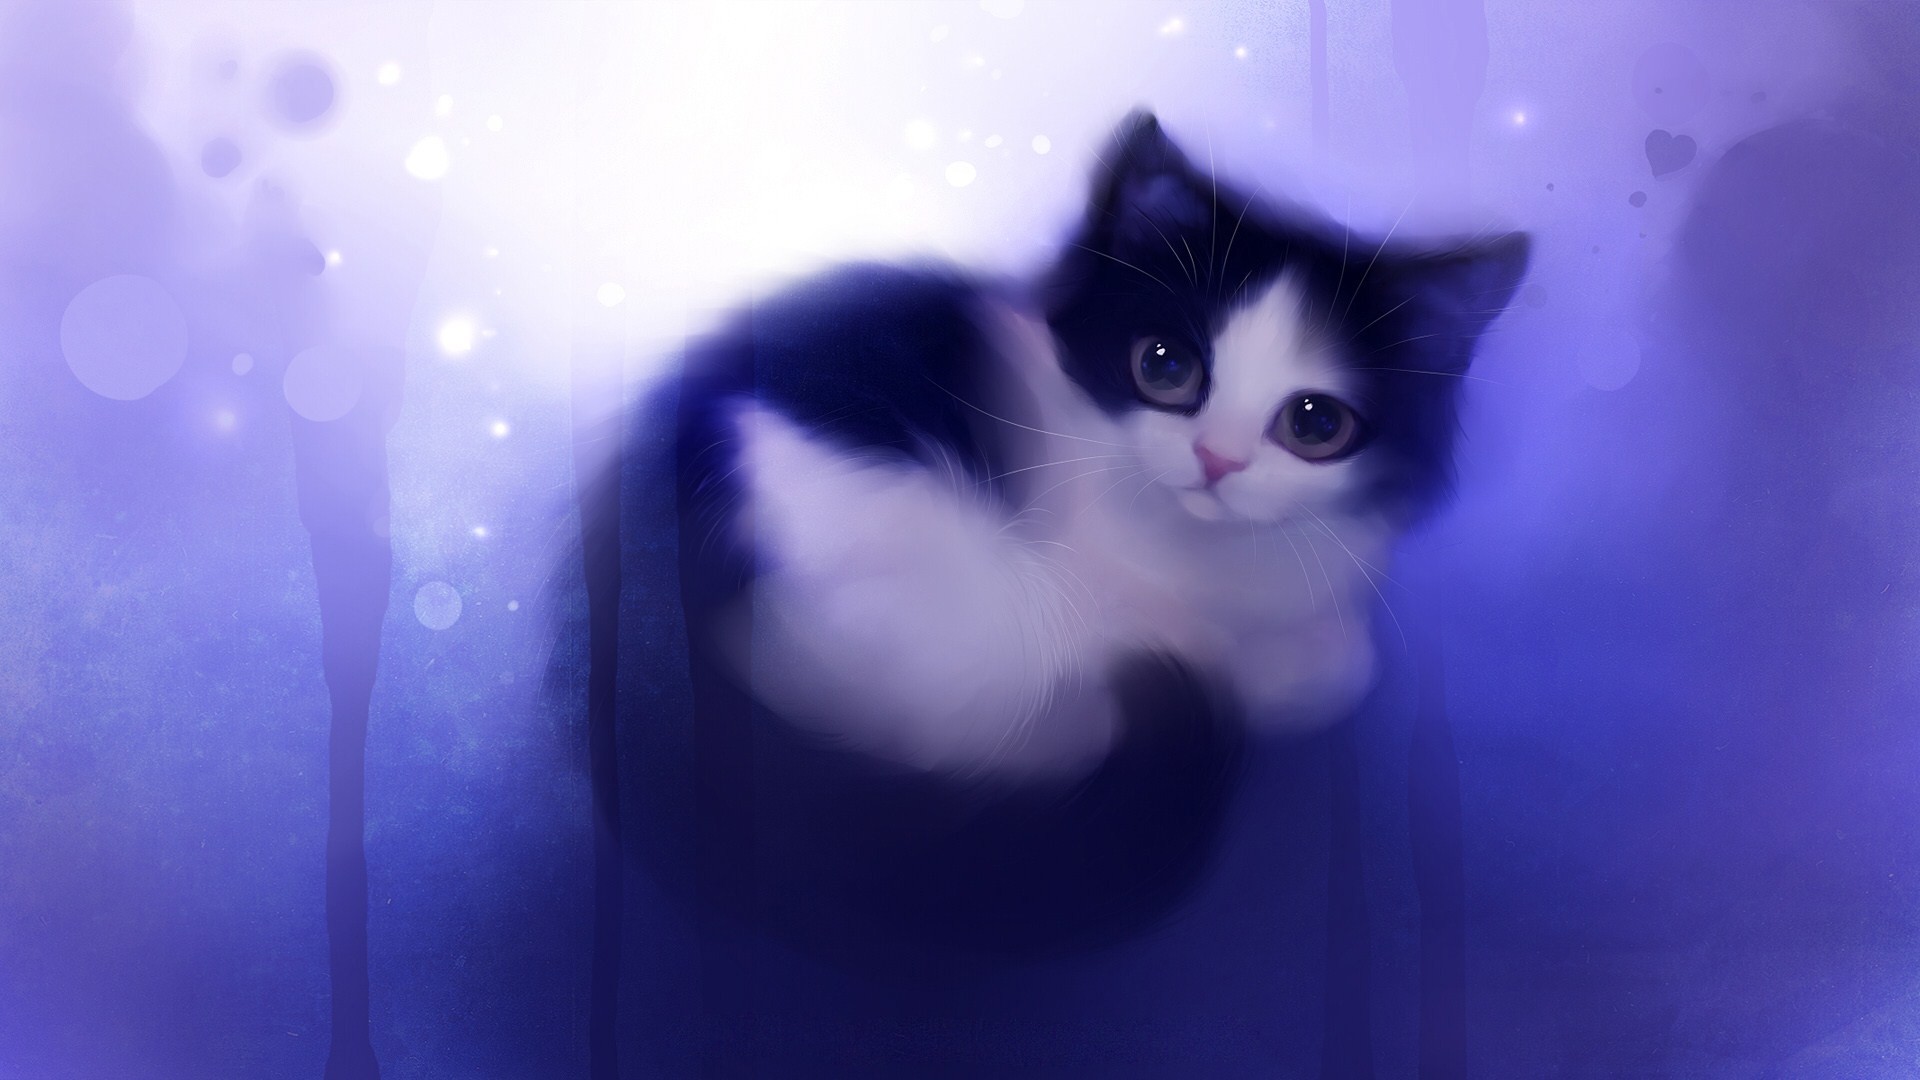 The Cat Itself Is Adorable I 039 M Really Liking The Blue Light Running Along 1920x1080